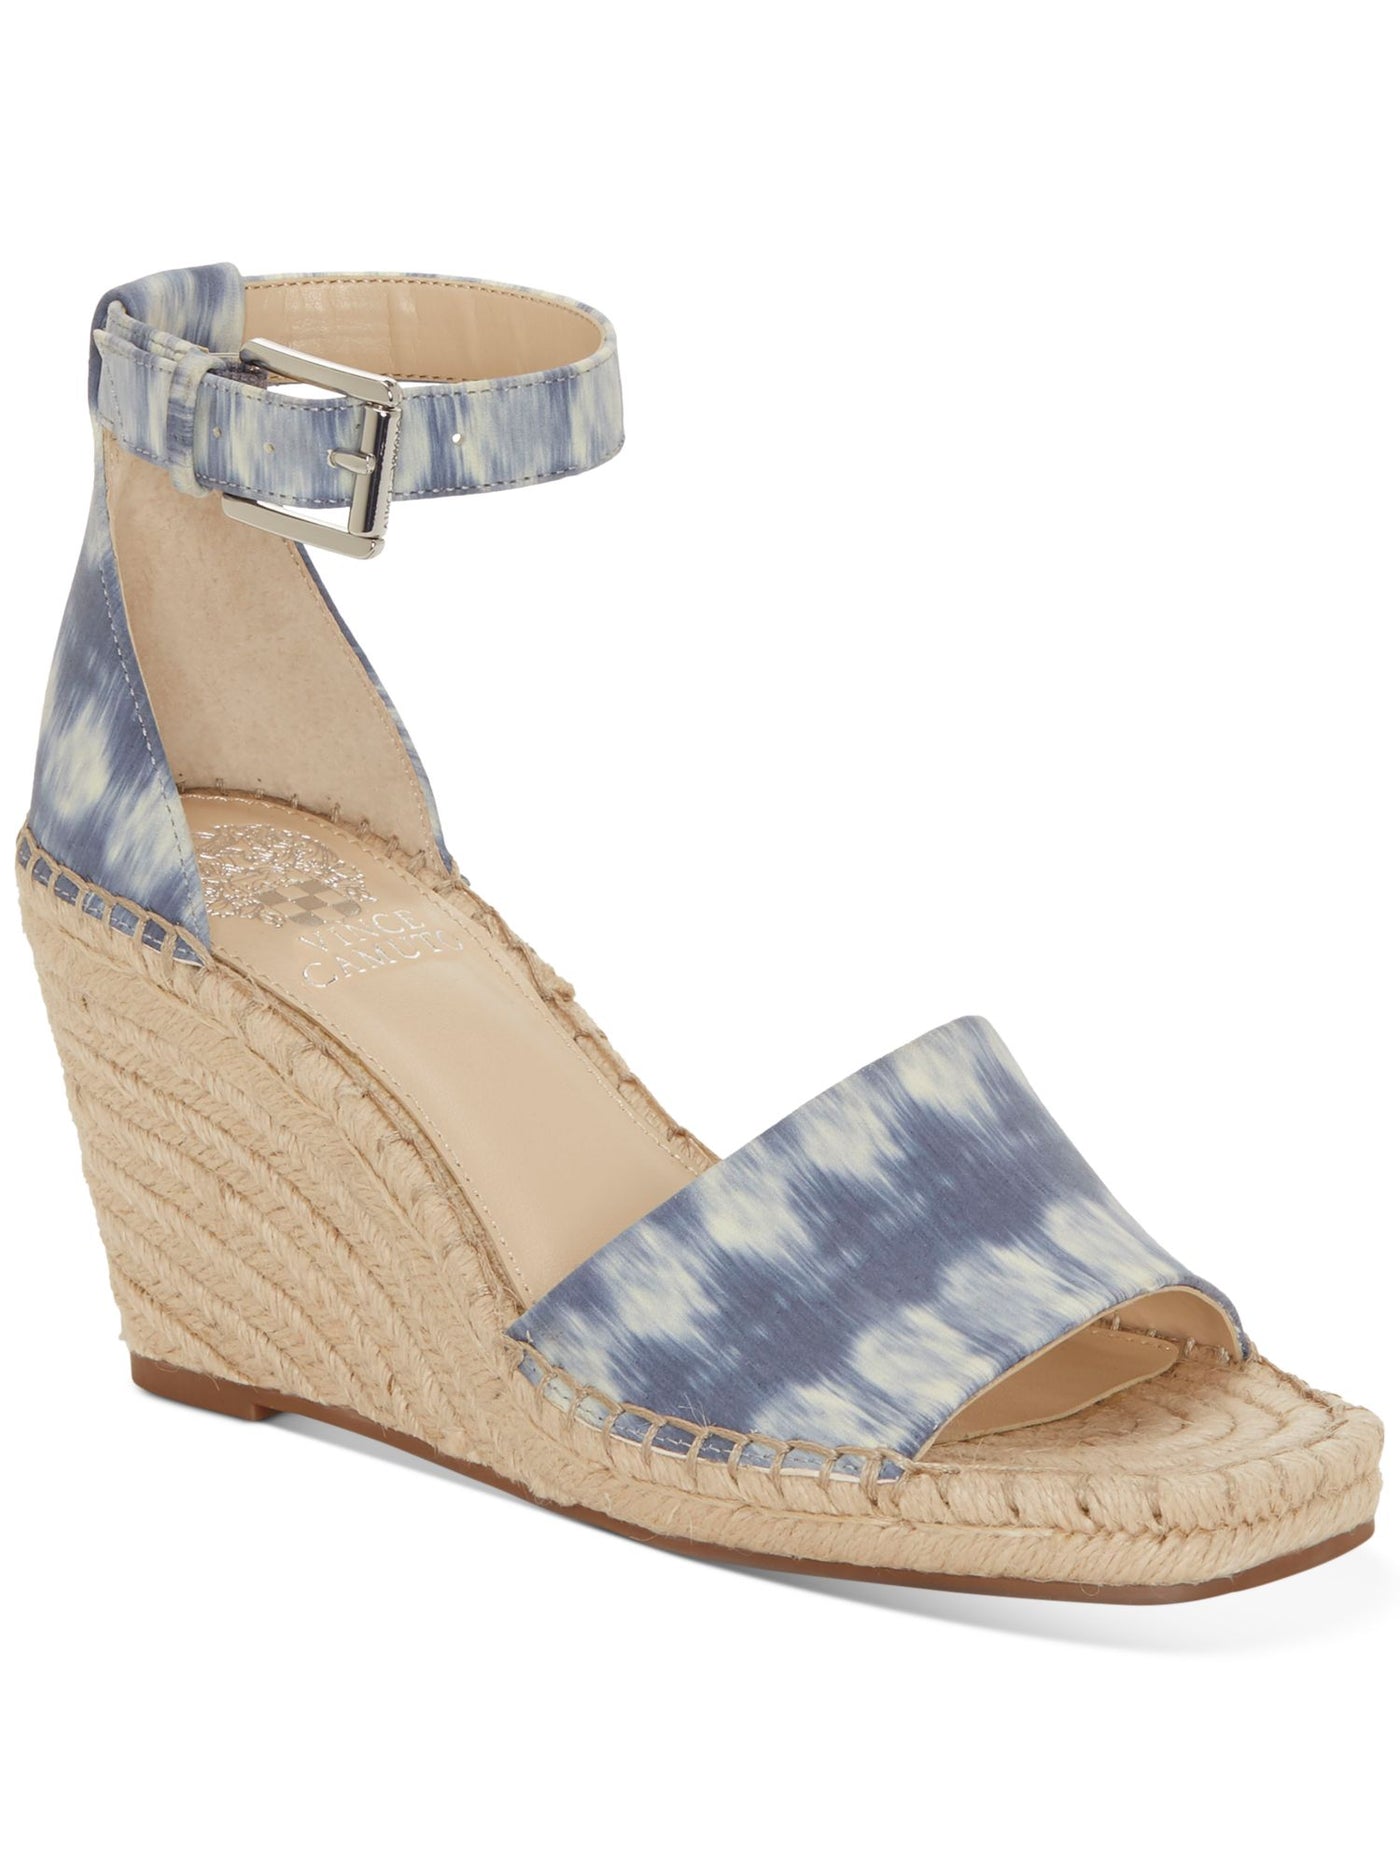 VINCE CAMUTO Womens Blue Patterned 1/2 Platform Ankle Strap Padded Maaza Square Toe Wedge Buckle Leather Espadrille Shoes 9 M